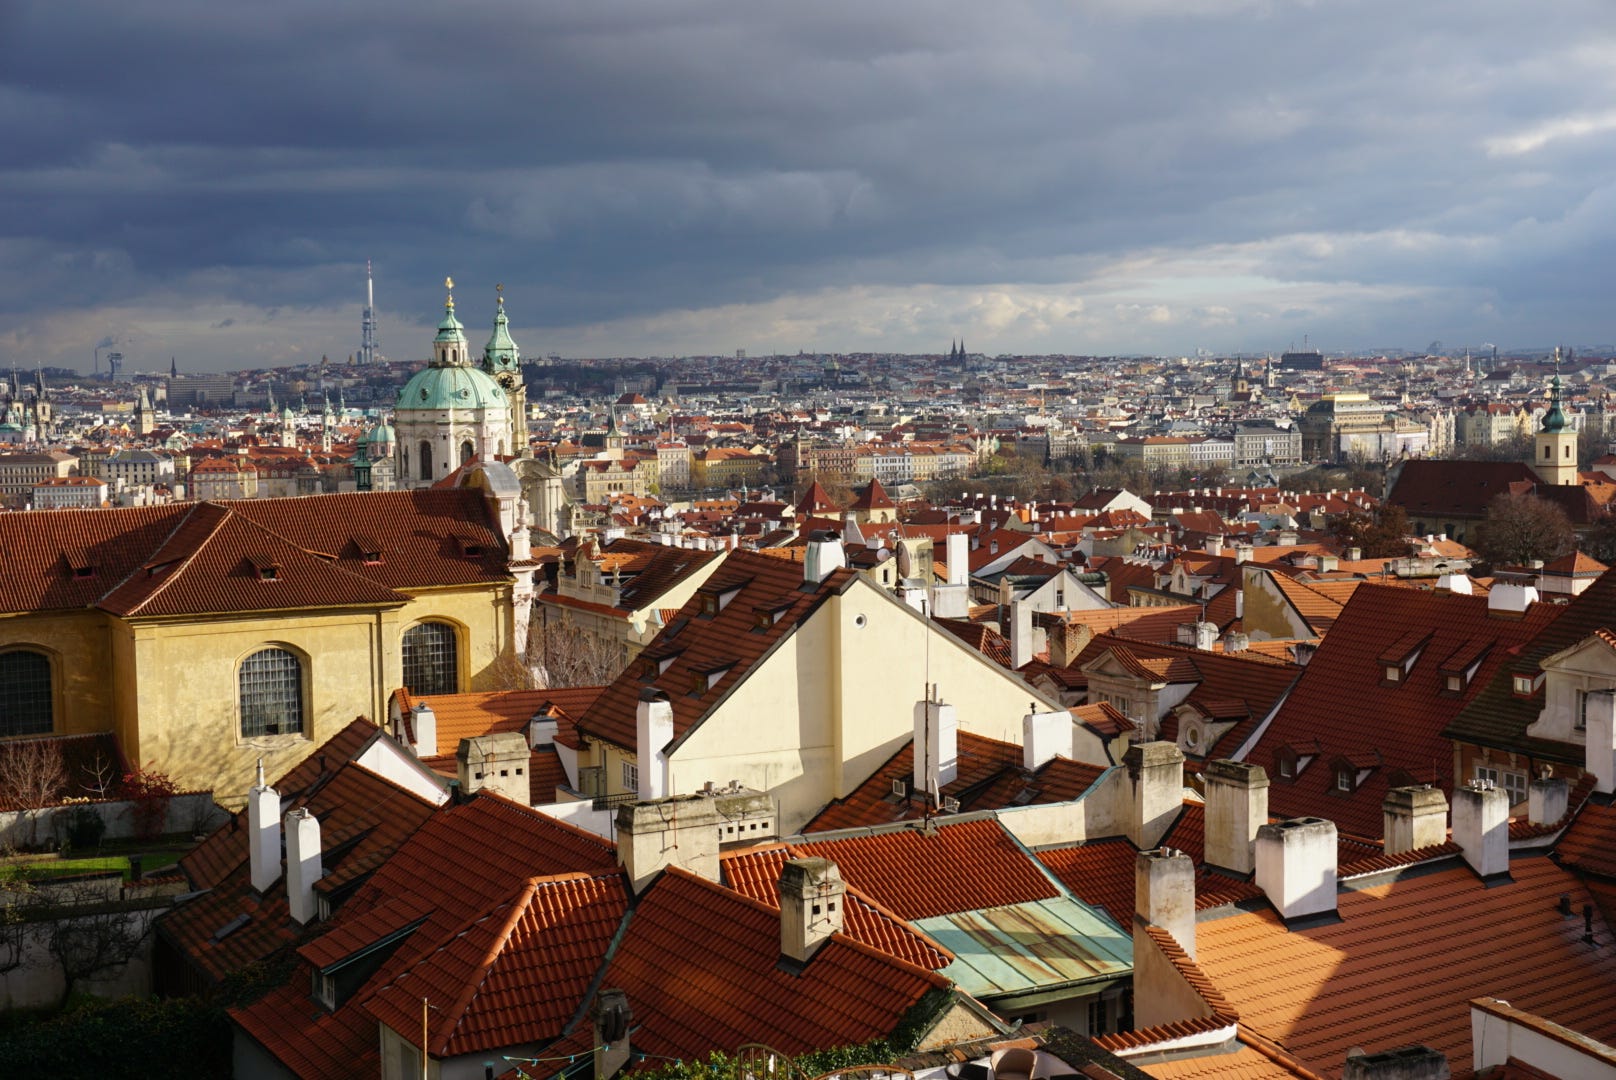 Beautiful skyline of Prague filled with red tiled roofs.